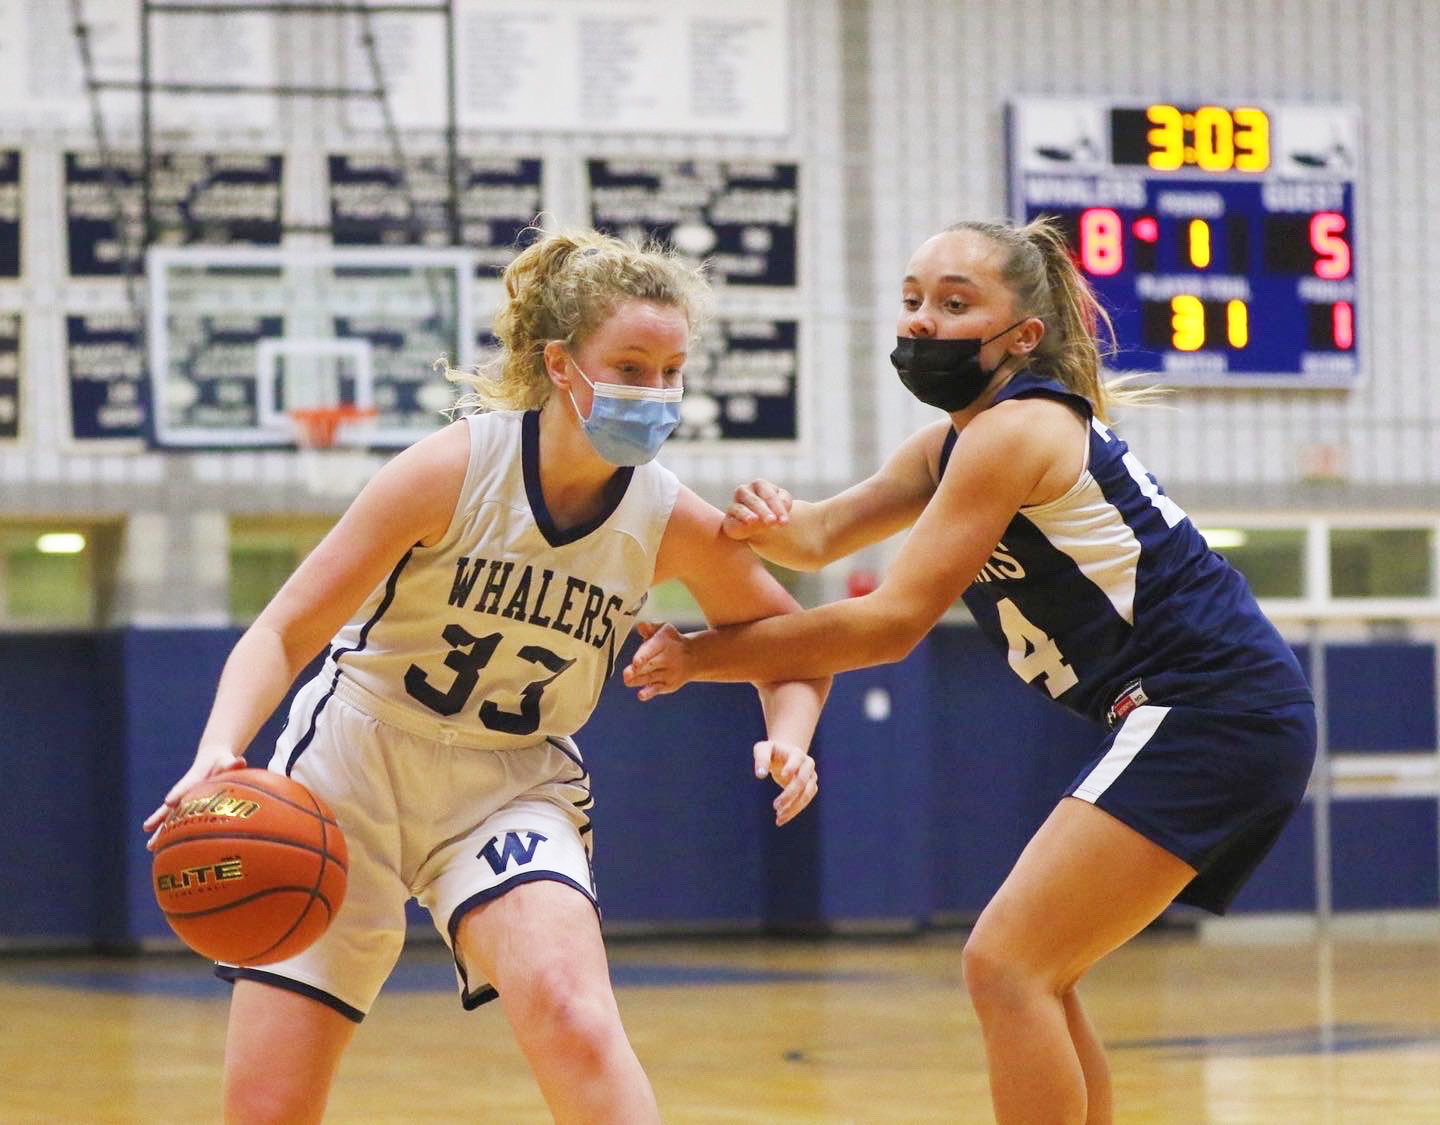 Maclaine Willett was the leading scorer in a game against Cape Cod Academy, with 12 points, netting a three-pointer in every quarter.